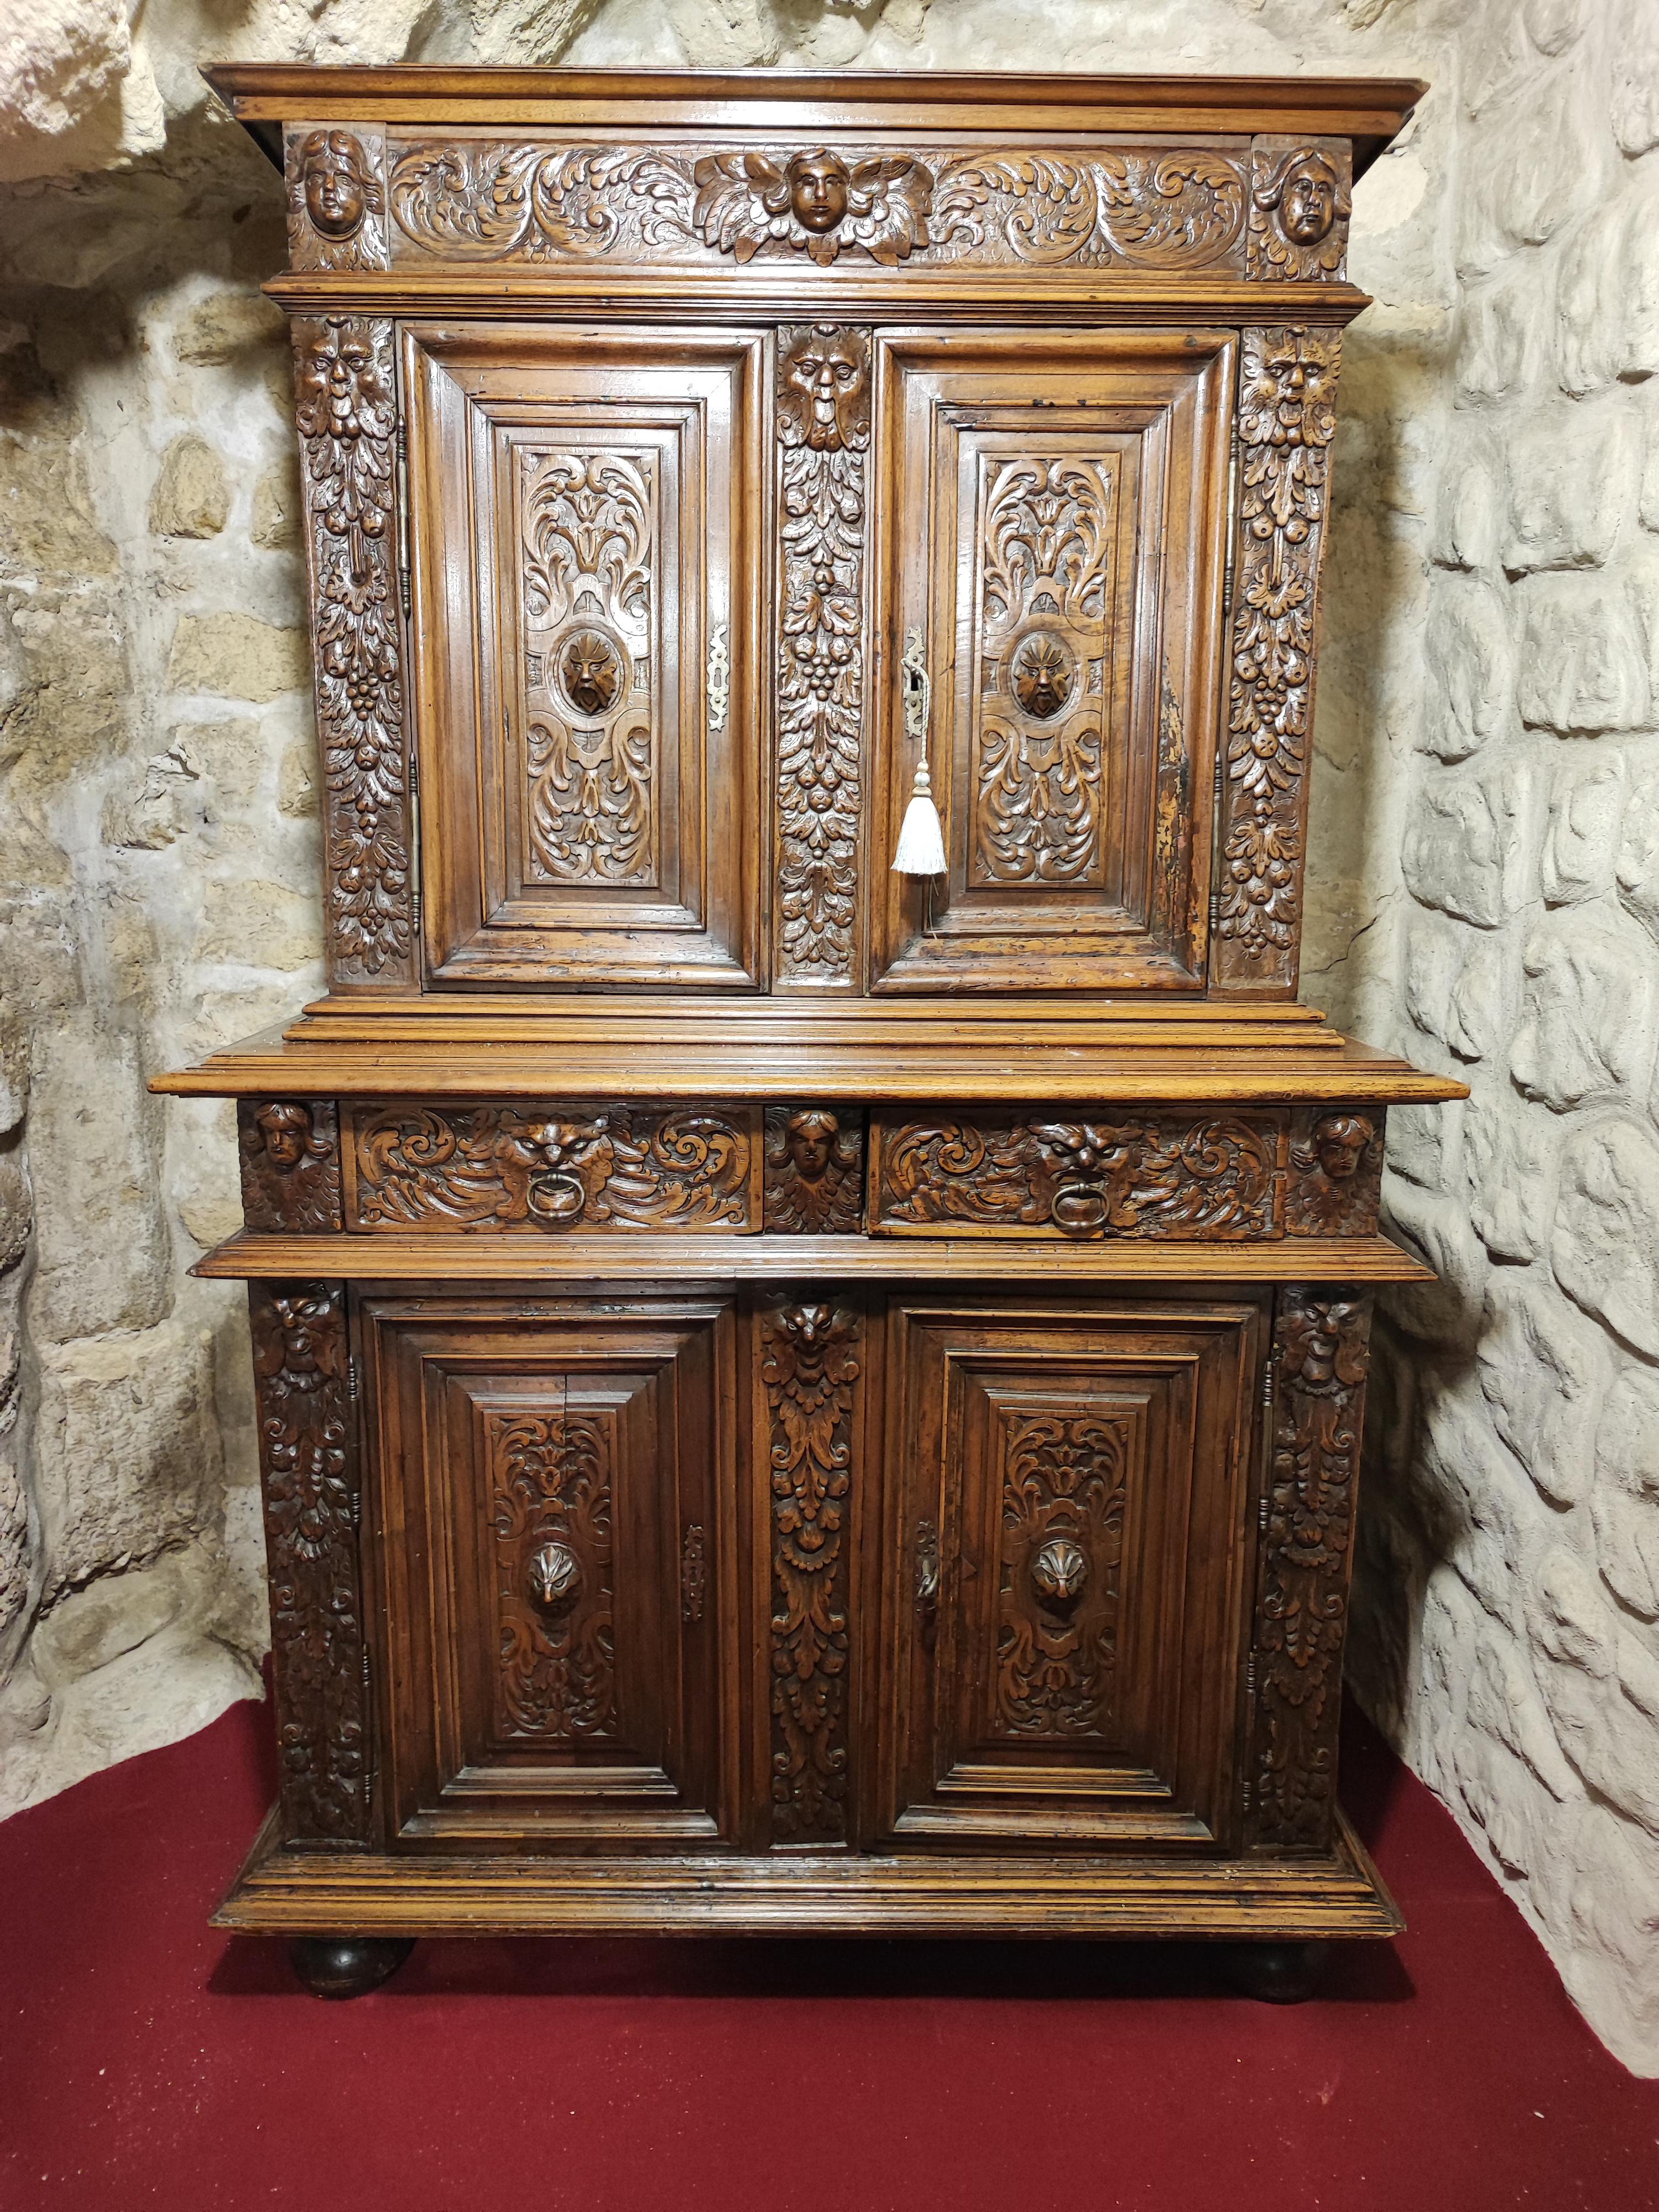 SMALL RENAISSANCE CABINET

ORIGIN: PROVENCE
PERIOD: END OF THE 16th CENTURY

Height: 175cm
Length: 102cm
Depth: 50cm

Blond walnut


This small cabinet in walnut with two bodies opens with four front leaves and two richly decorated drawers. It rests